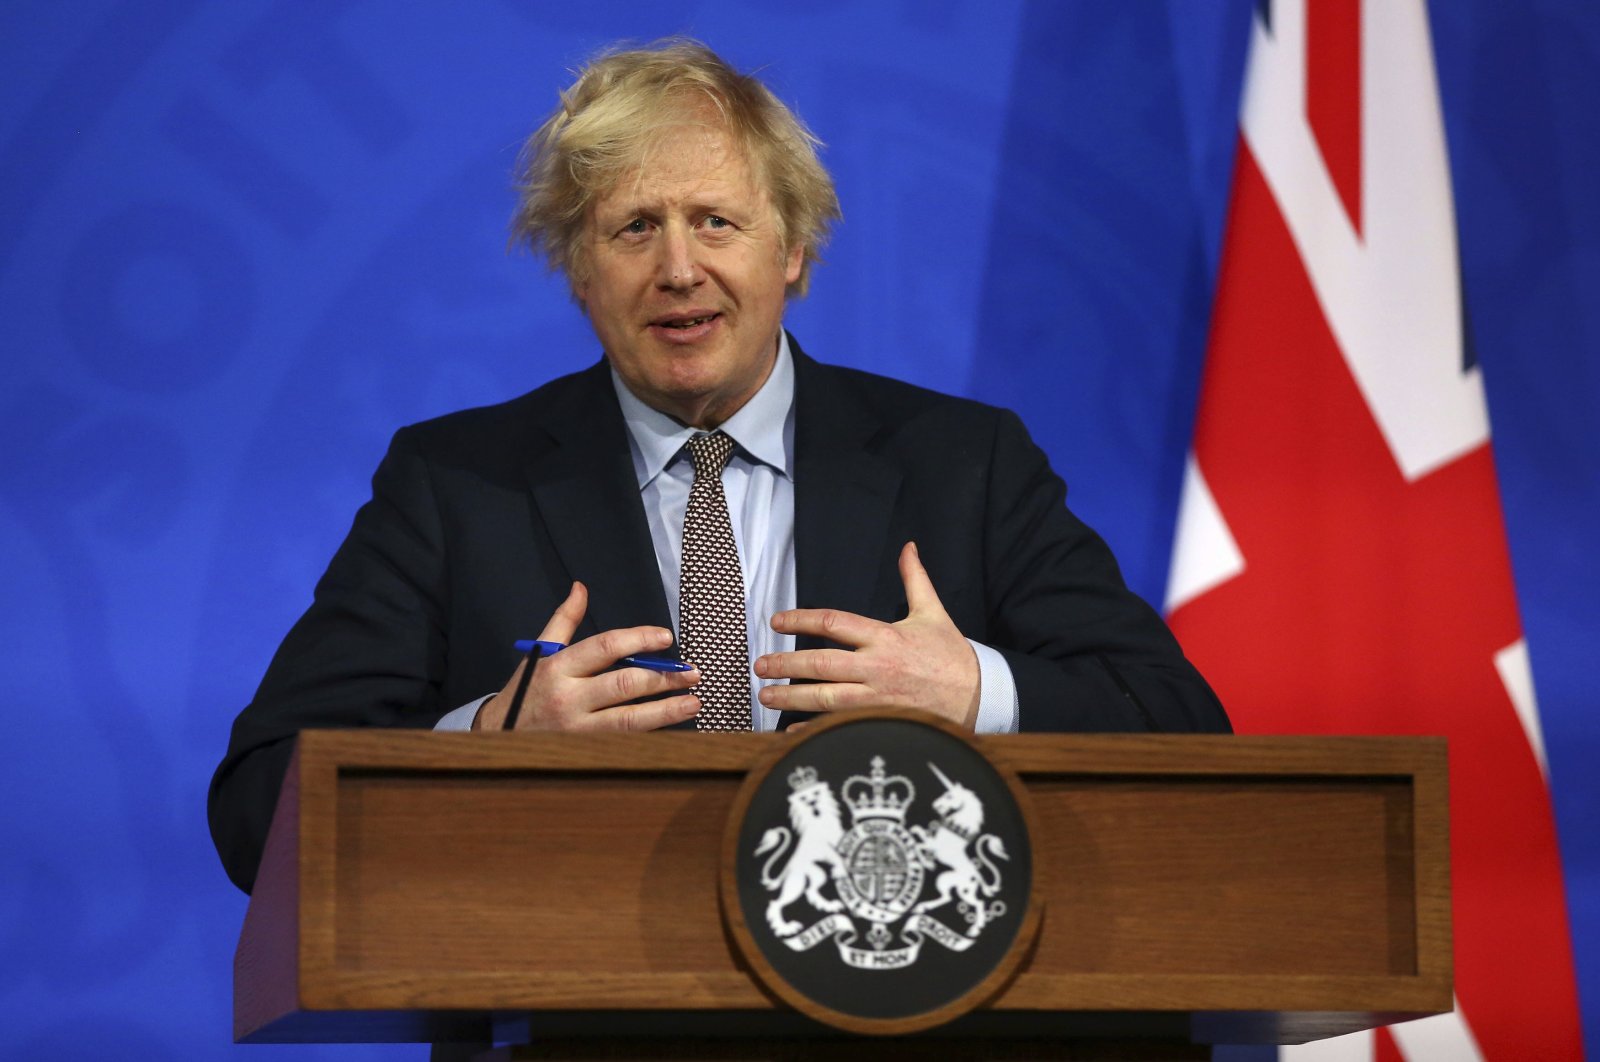 Britain's Prime Minister Boris Johnson speaks during a media briefing on COVID-19 from Downing Street's media briefing room in London, U.K., March 29, 2021. (AP Photo)